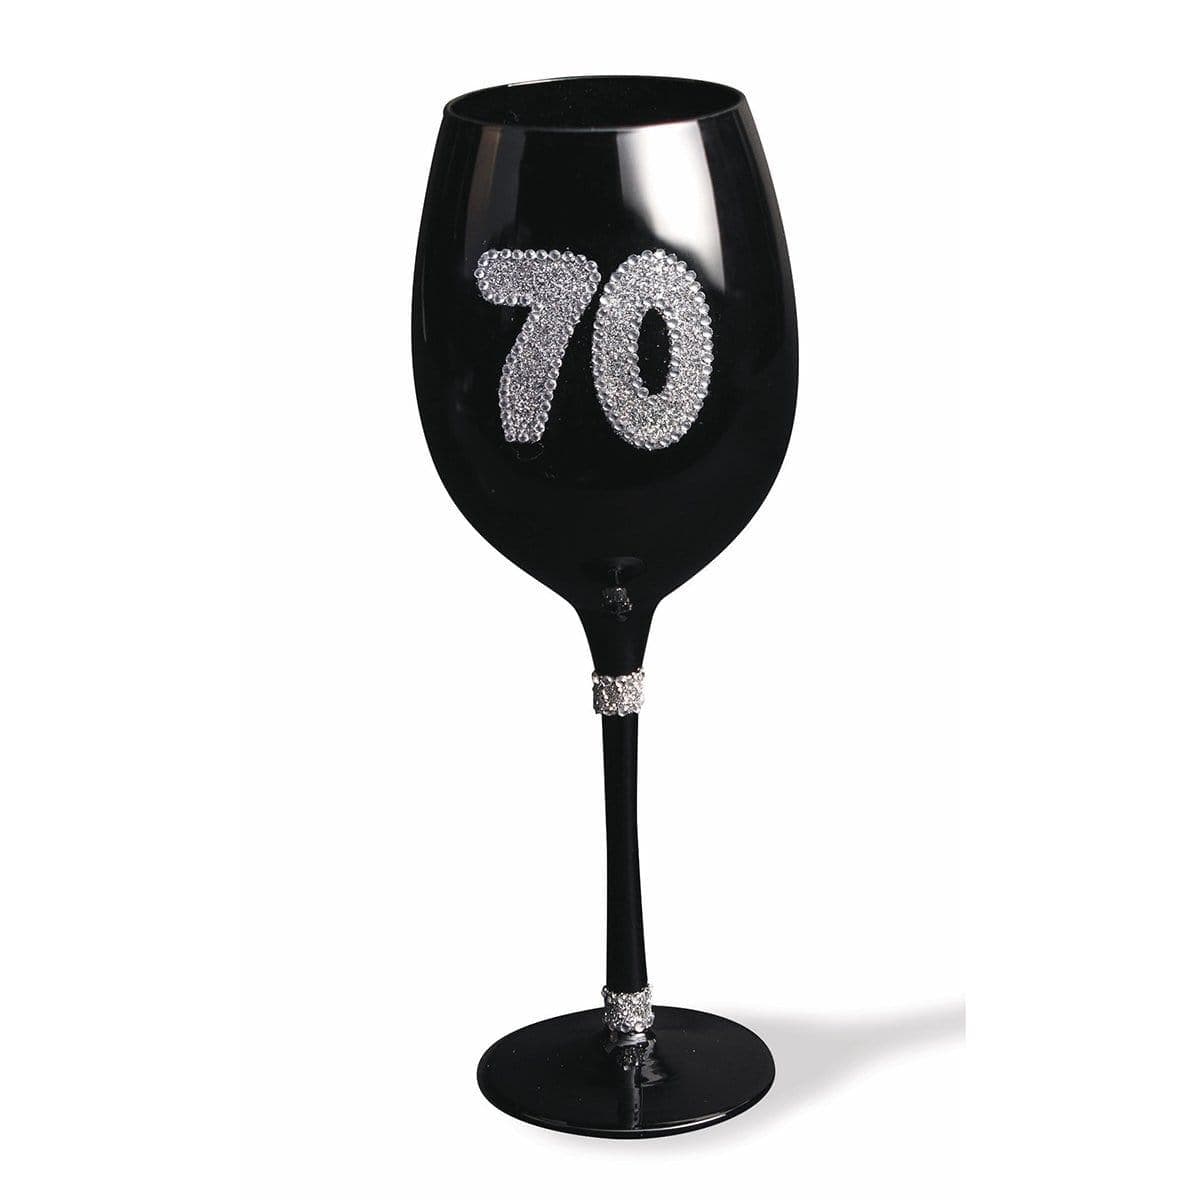 Buy Age Specific Birthday 70th Birthday - Black Wine Glass sold at Party Expert